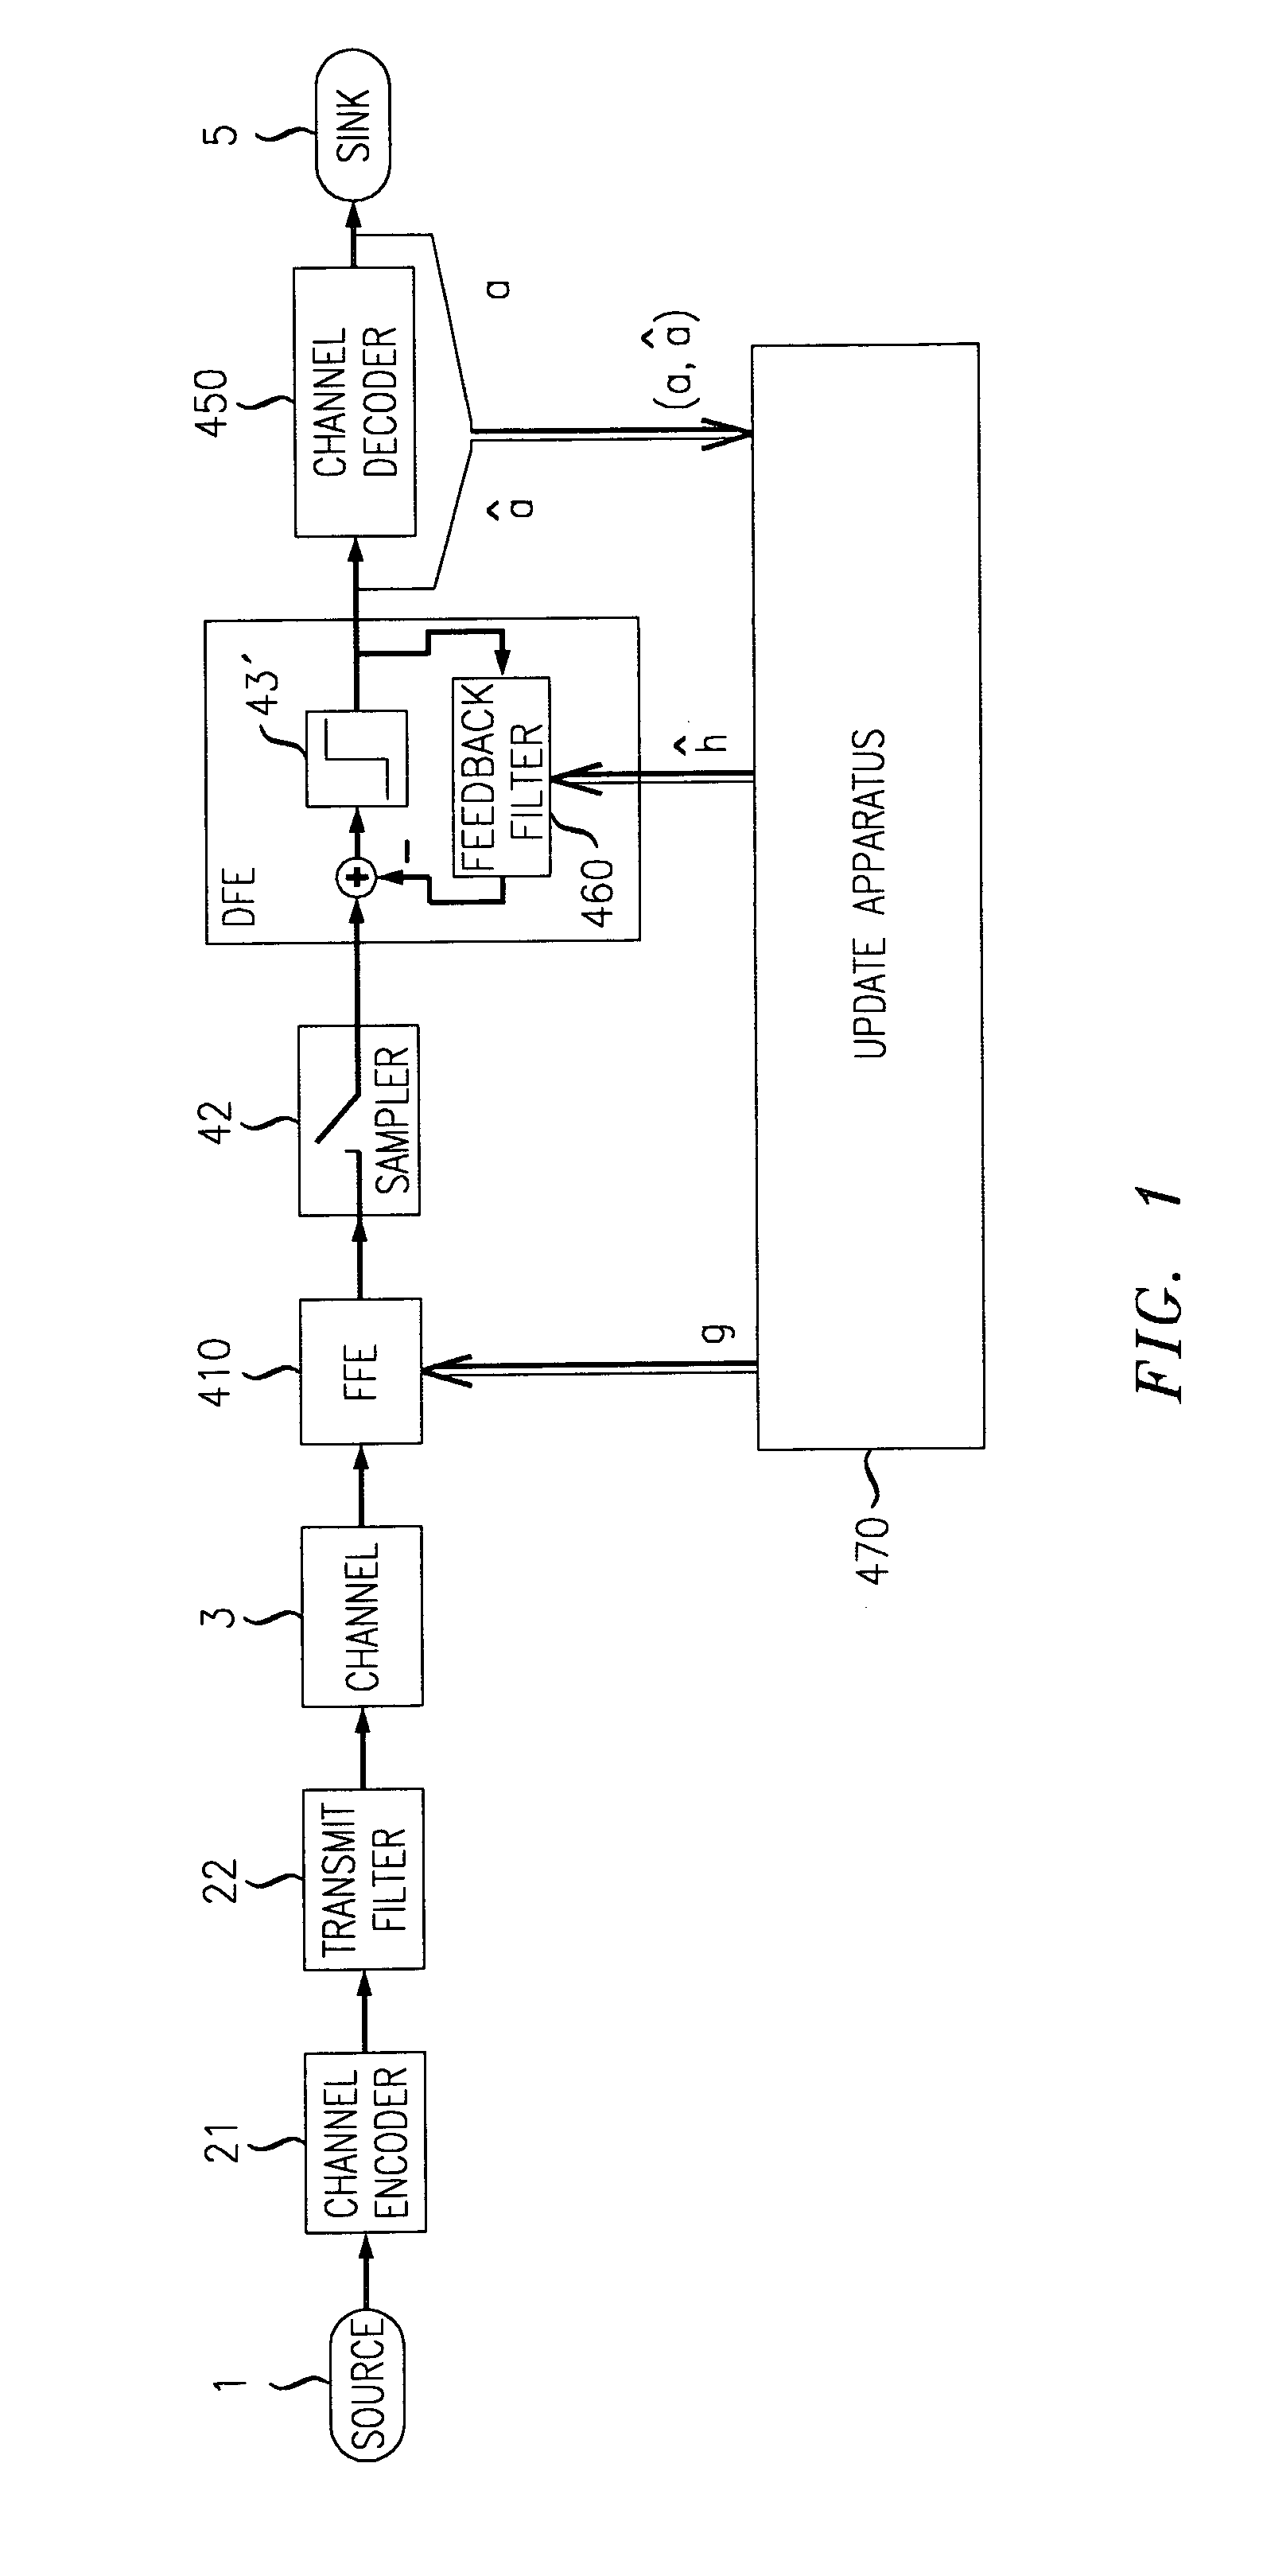 Receiver for high rate digital communication system